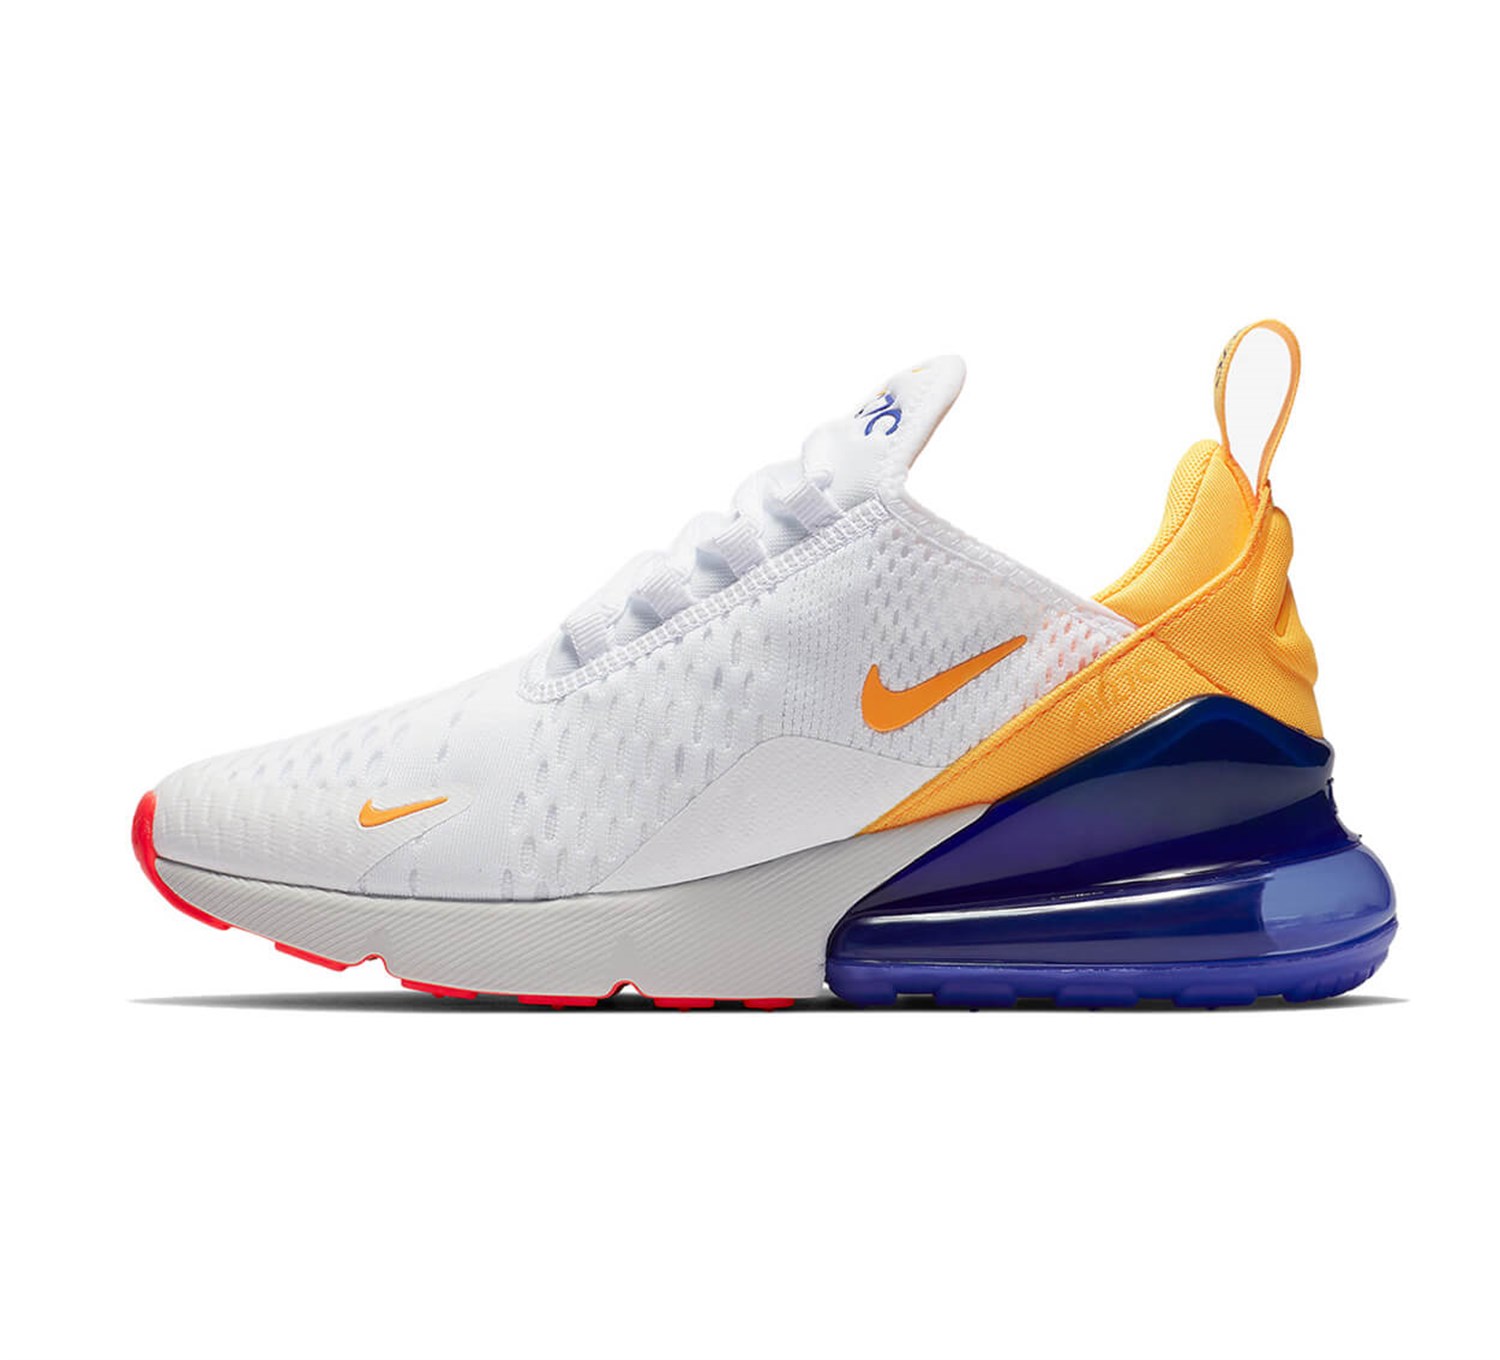 Buy NIKE AIR MAX 270 RUNNING AND TRAINING SHOES Online @ ₹2999 from ...